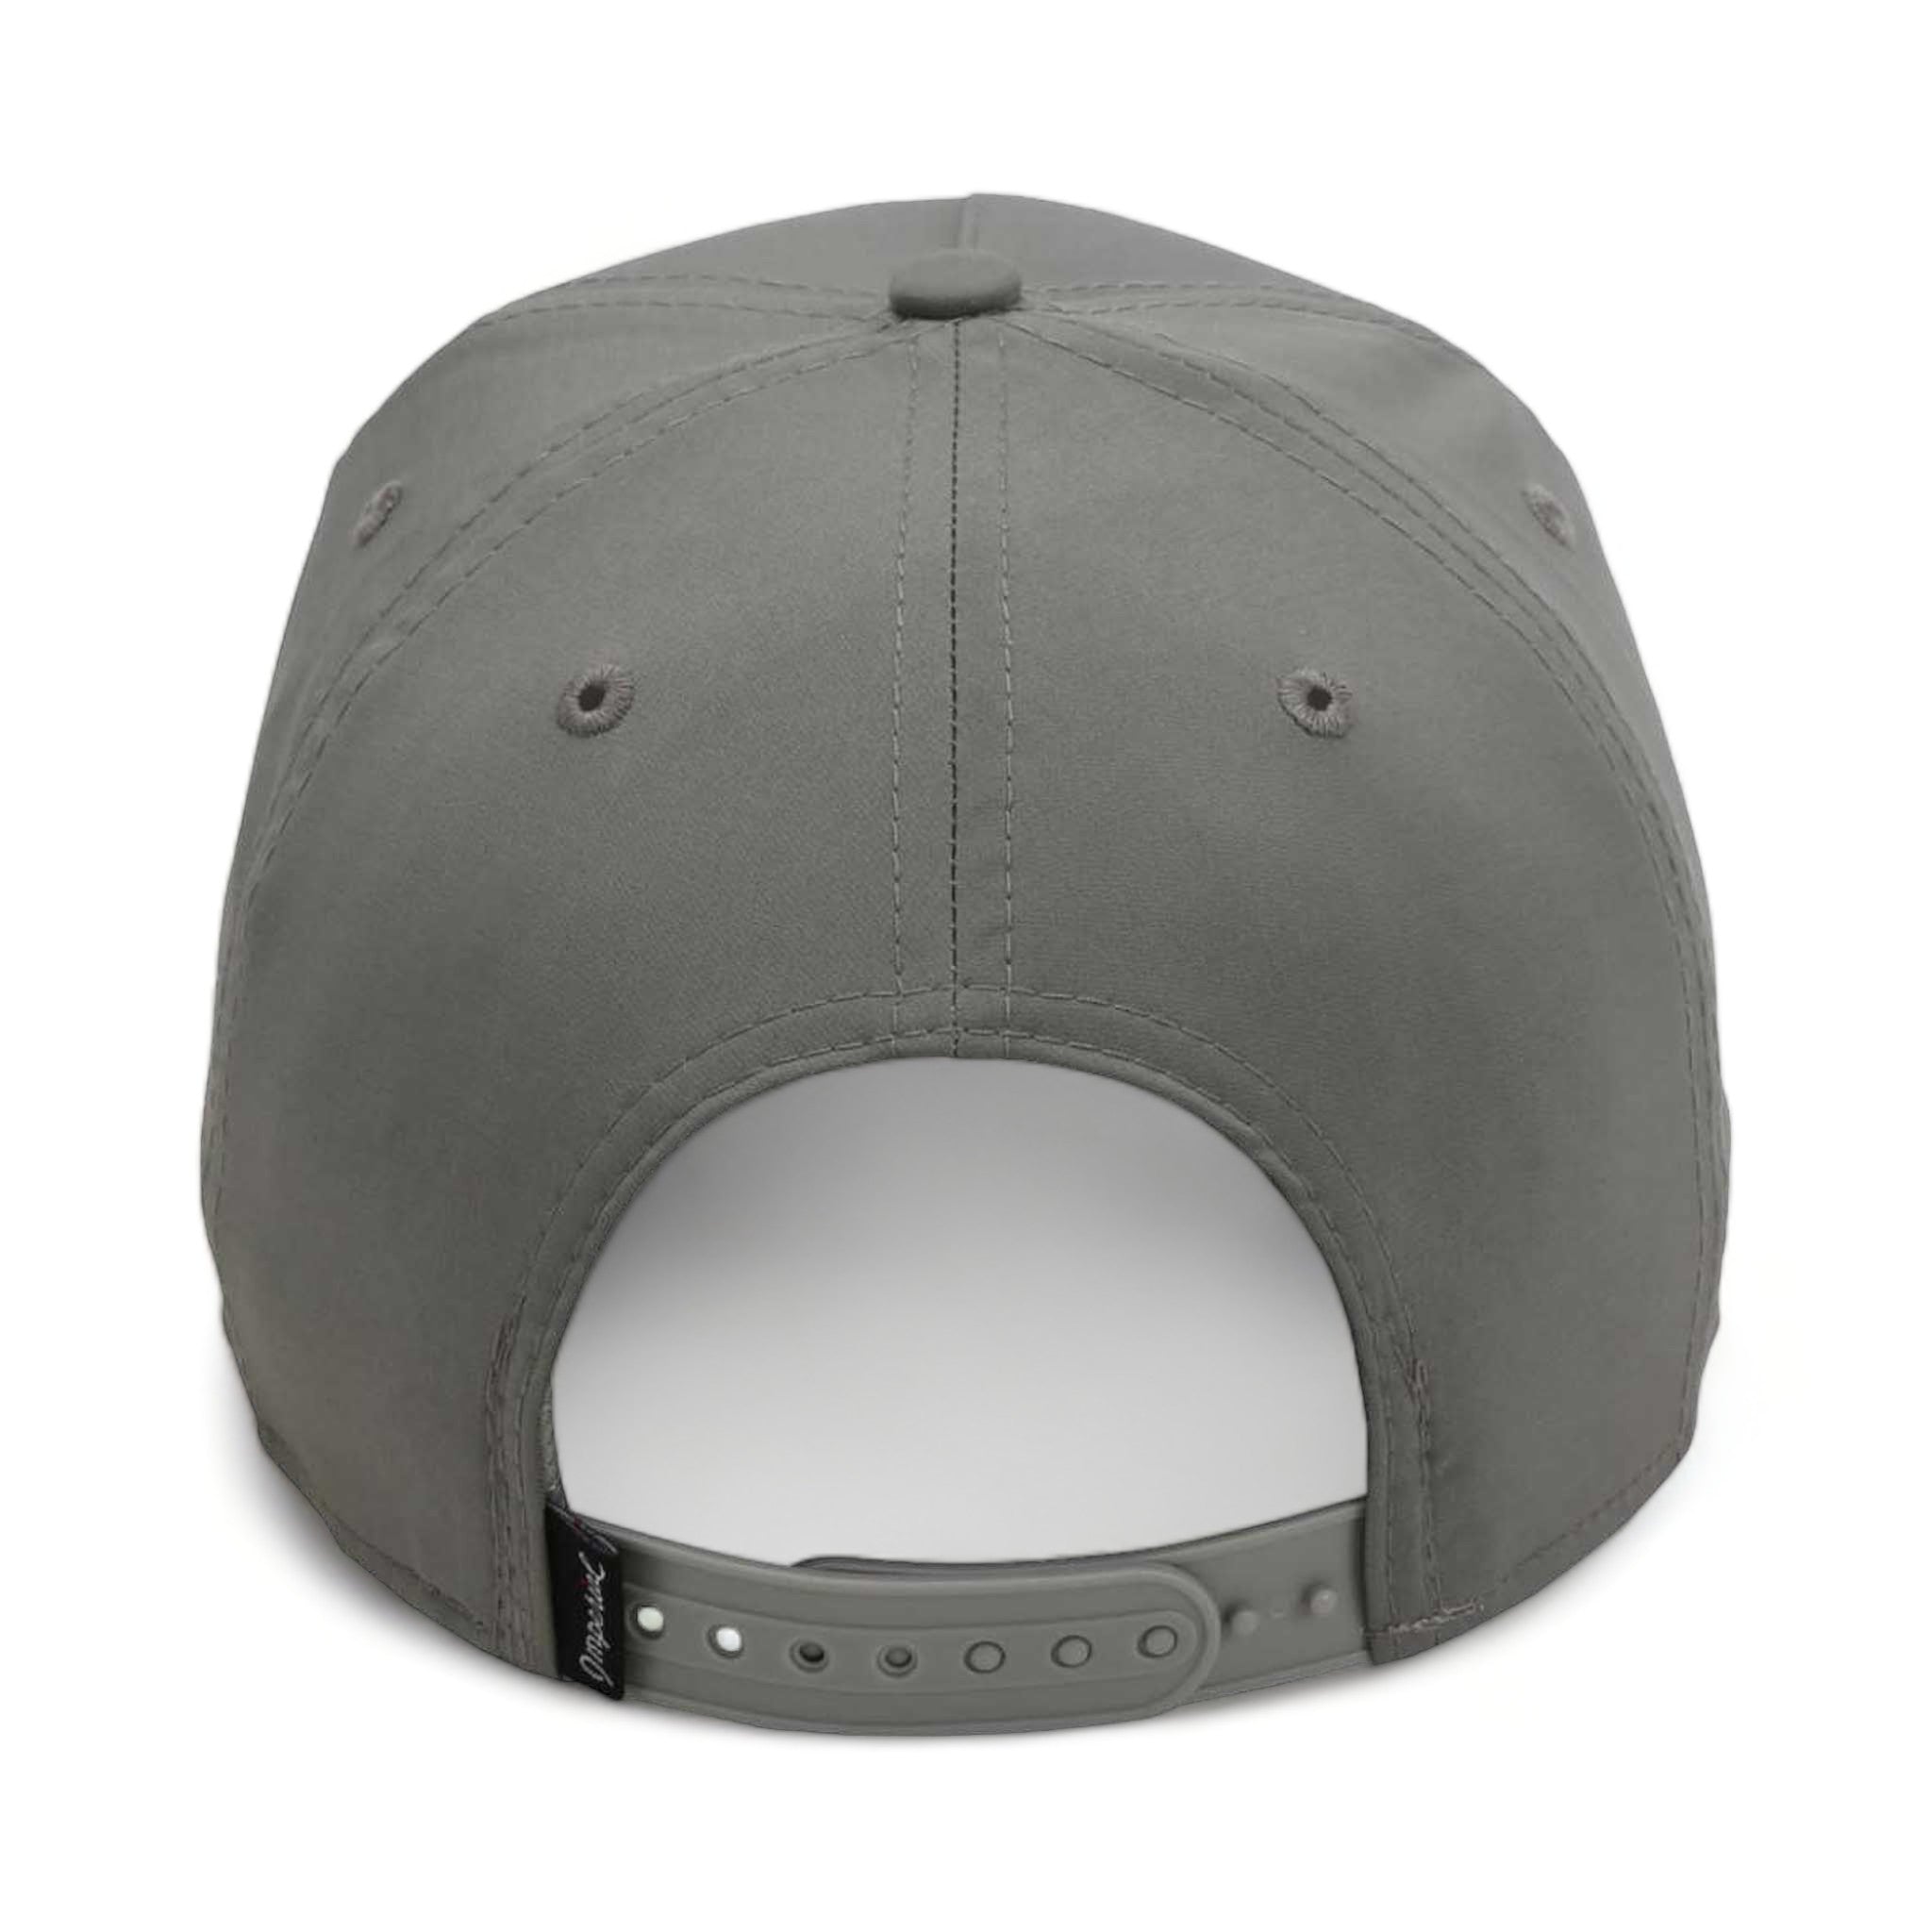 Back view of Imperial 5054 custom hat in grey and black